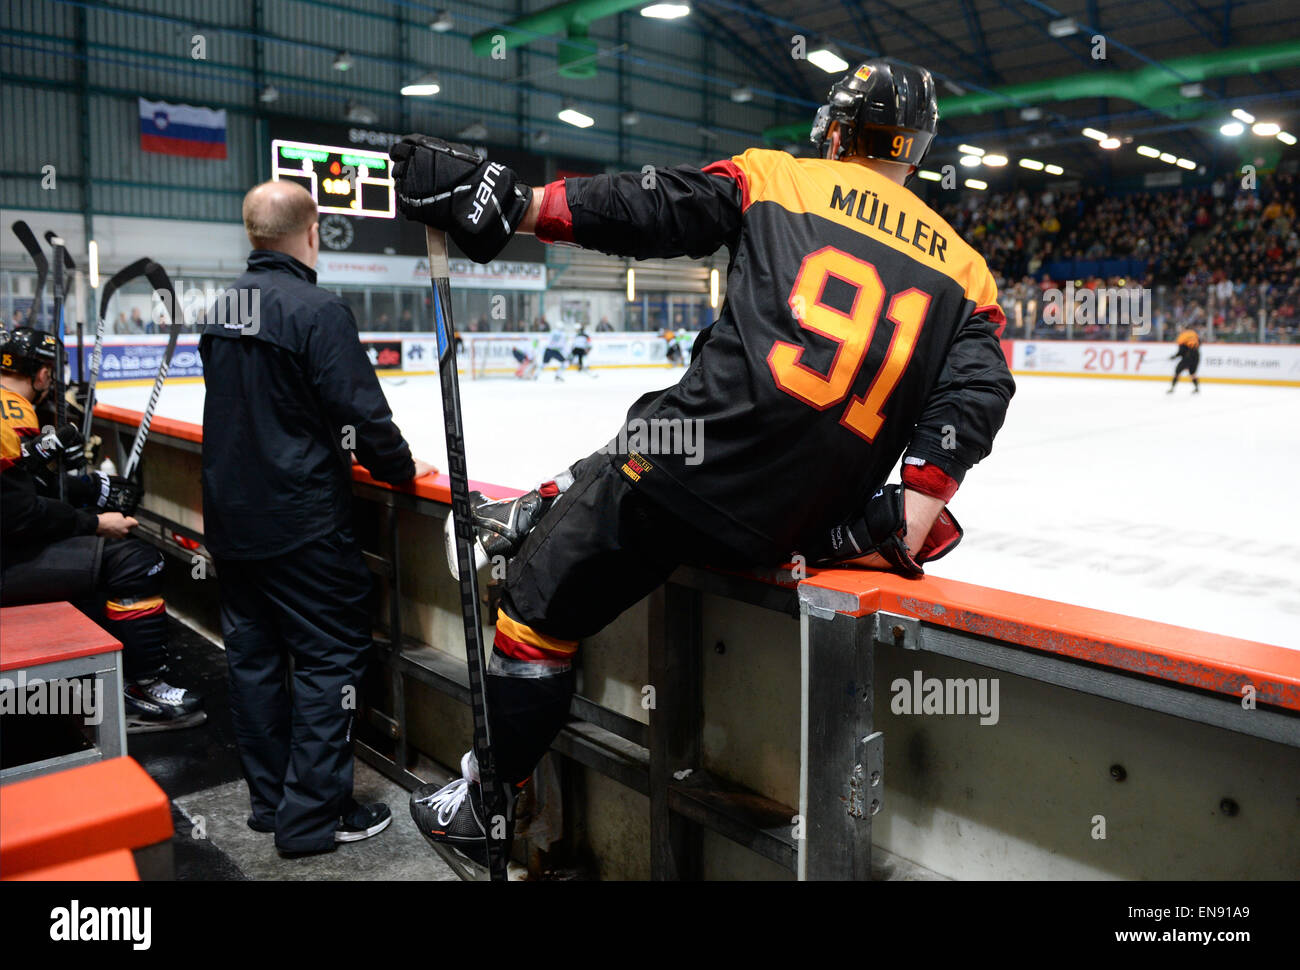 Germany's Moritz Mueller at the International Ice Hockey match between Germany and Slovenia in the Wellblech Palace in Berlin, Germany, 29 April 2015. Photo: BRITTA PEDERSEN/dpa Stock Photo